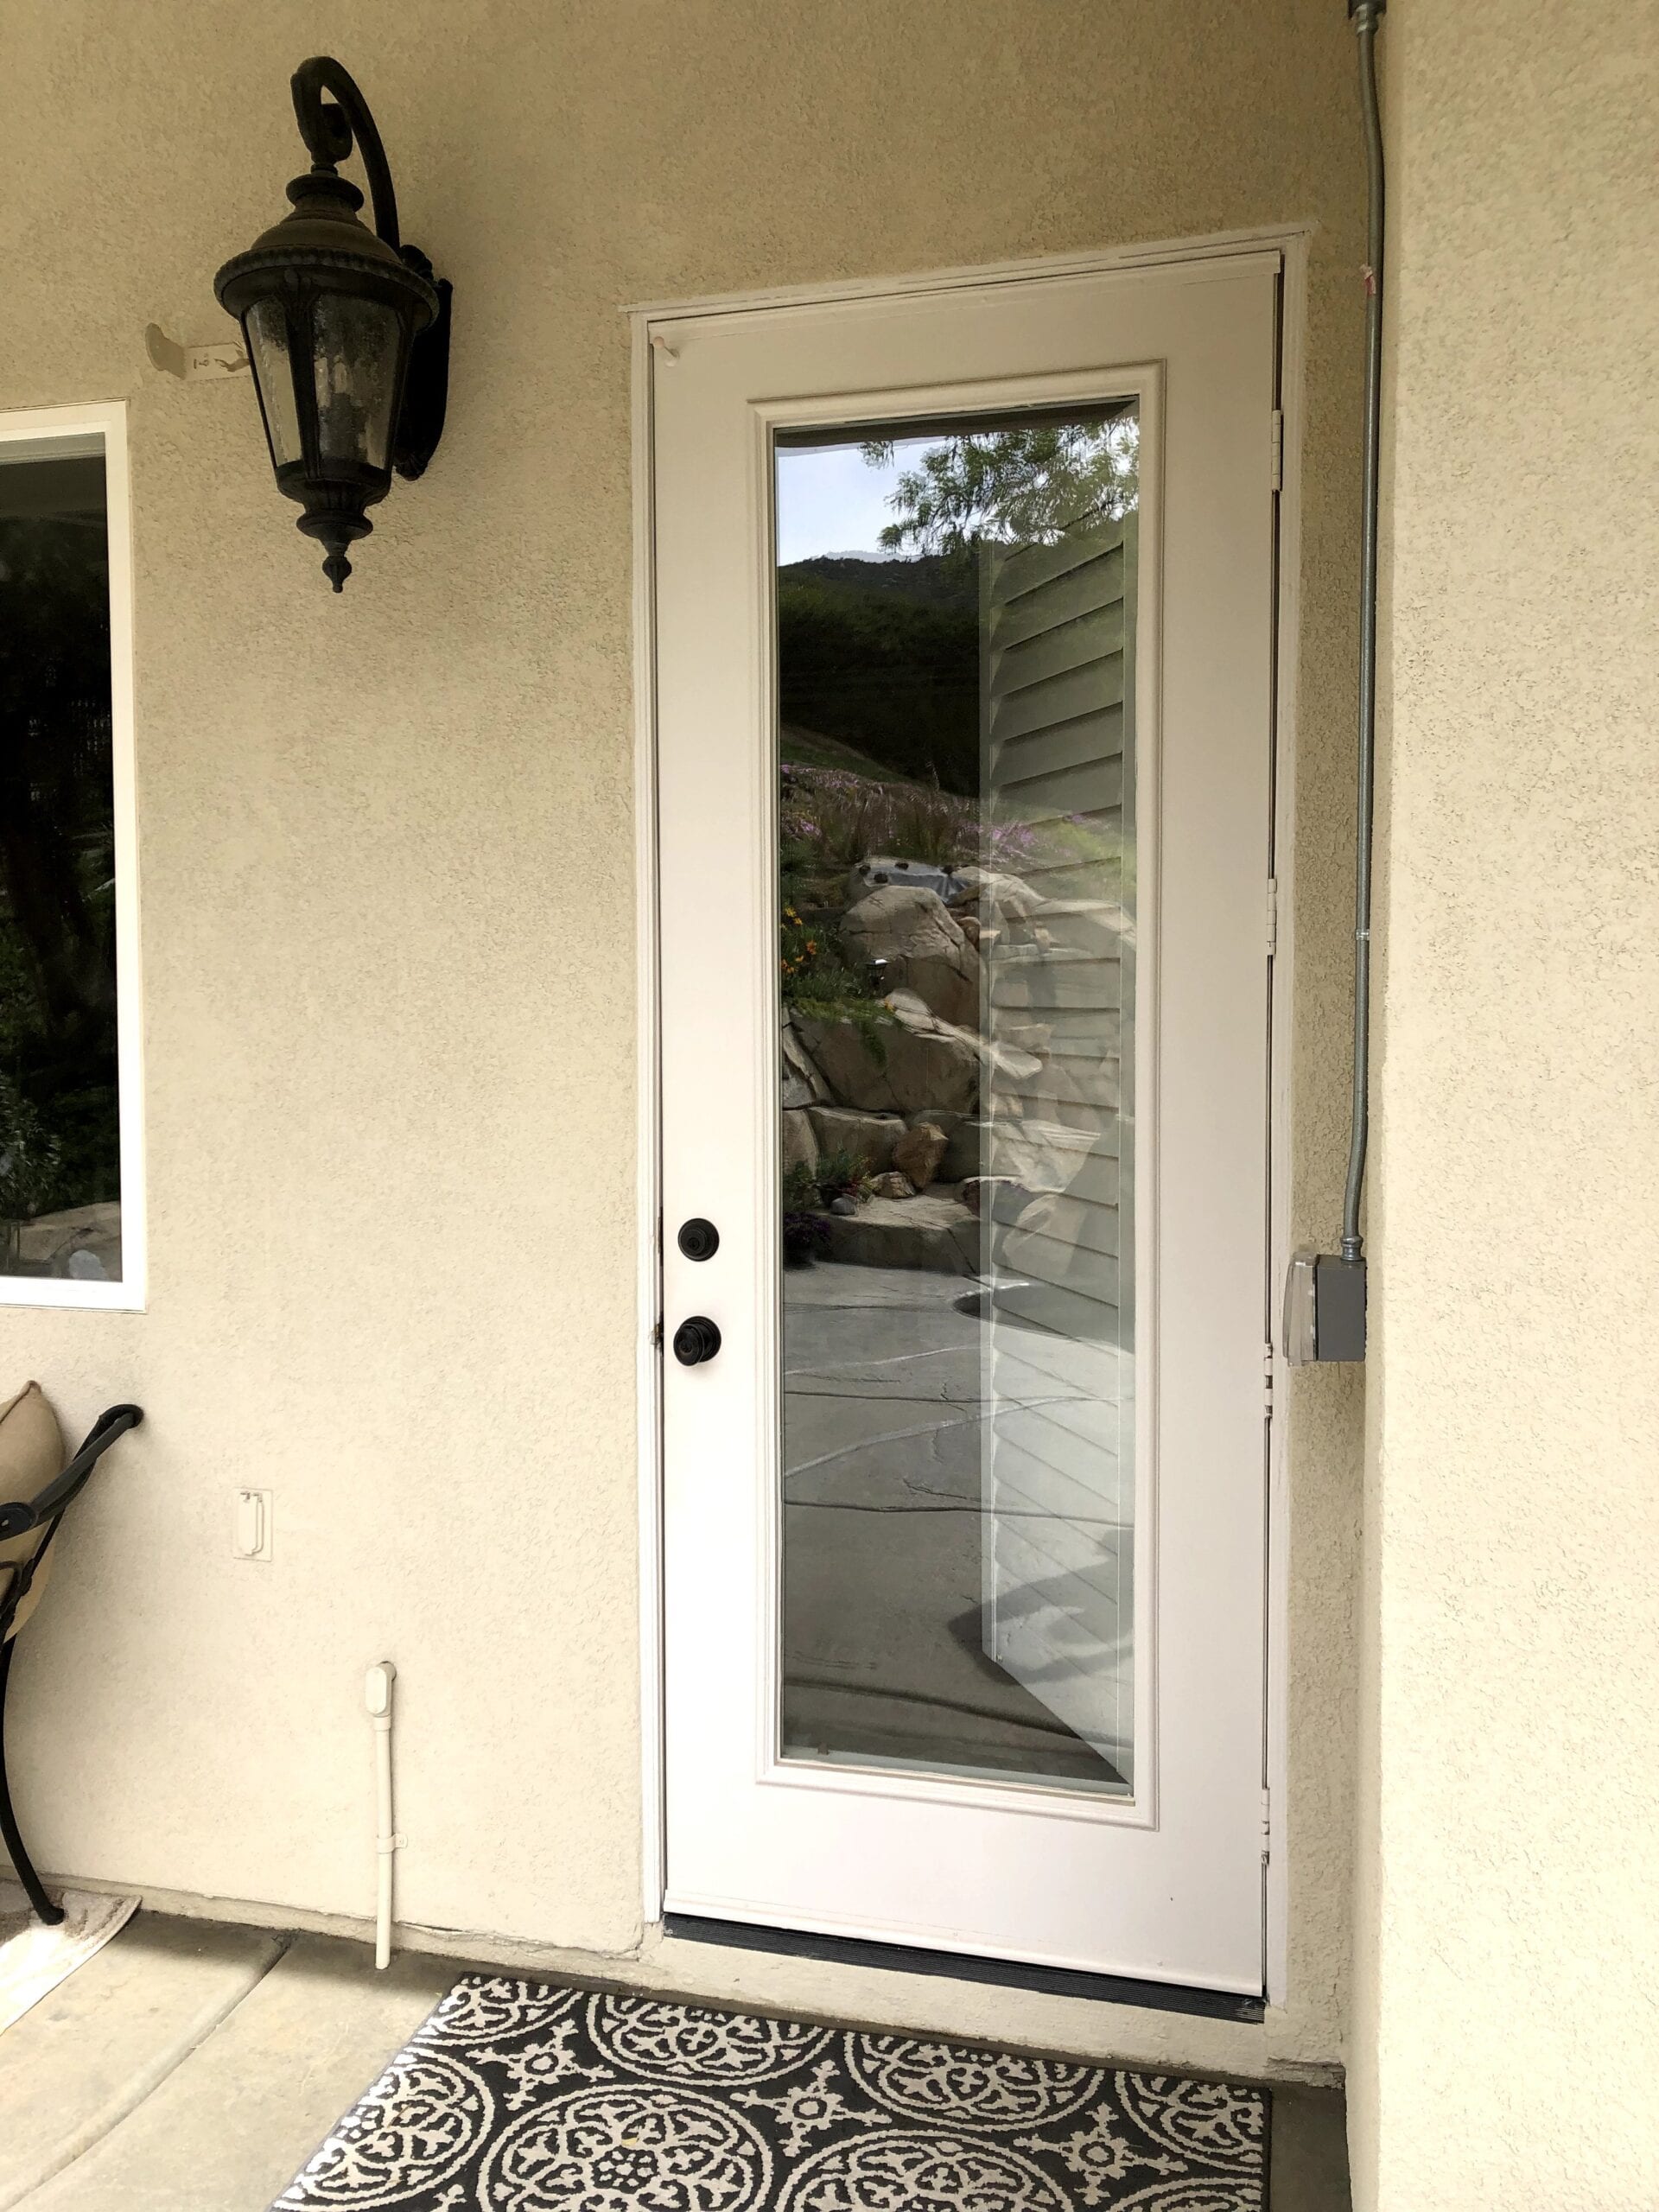 Before installing a dual reflective film in murrieta on a door 